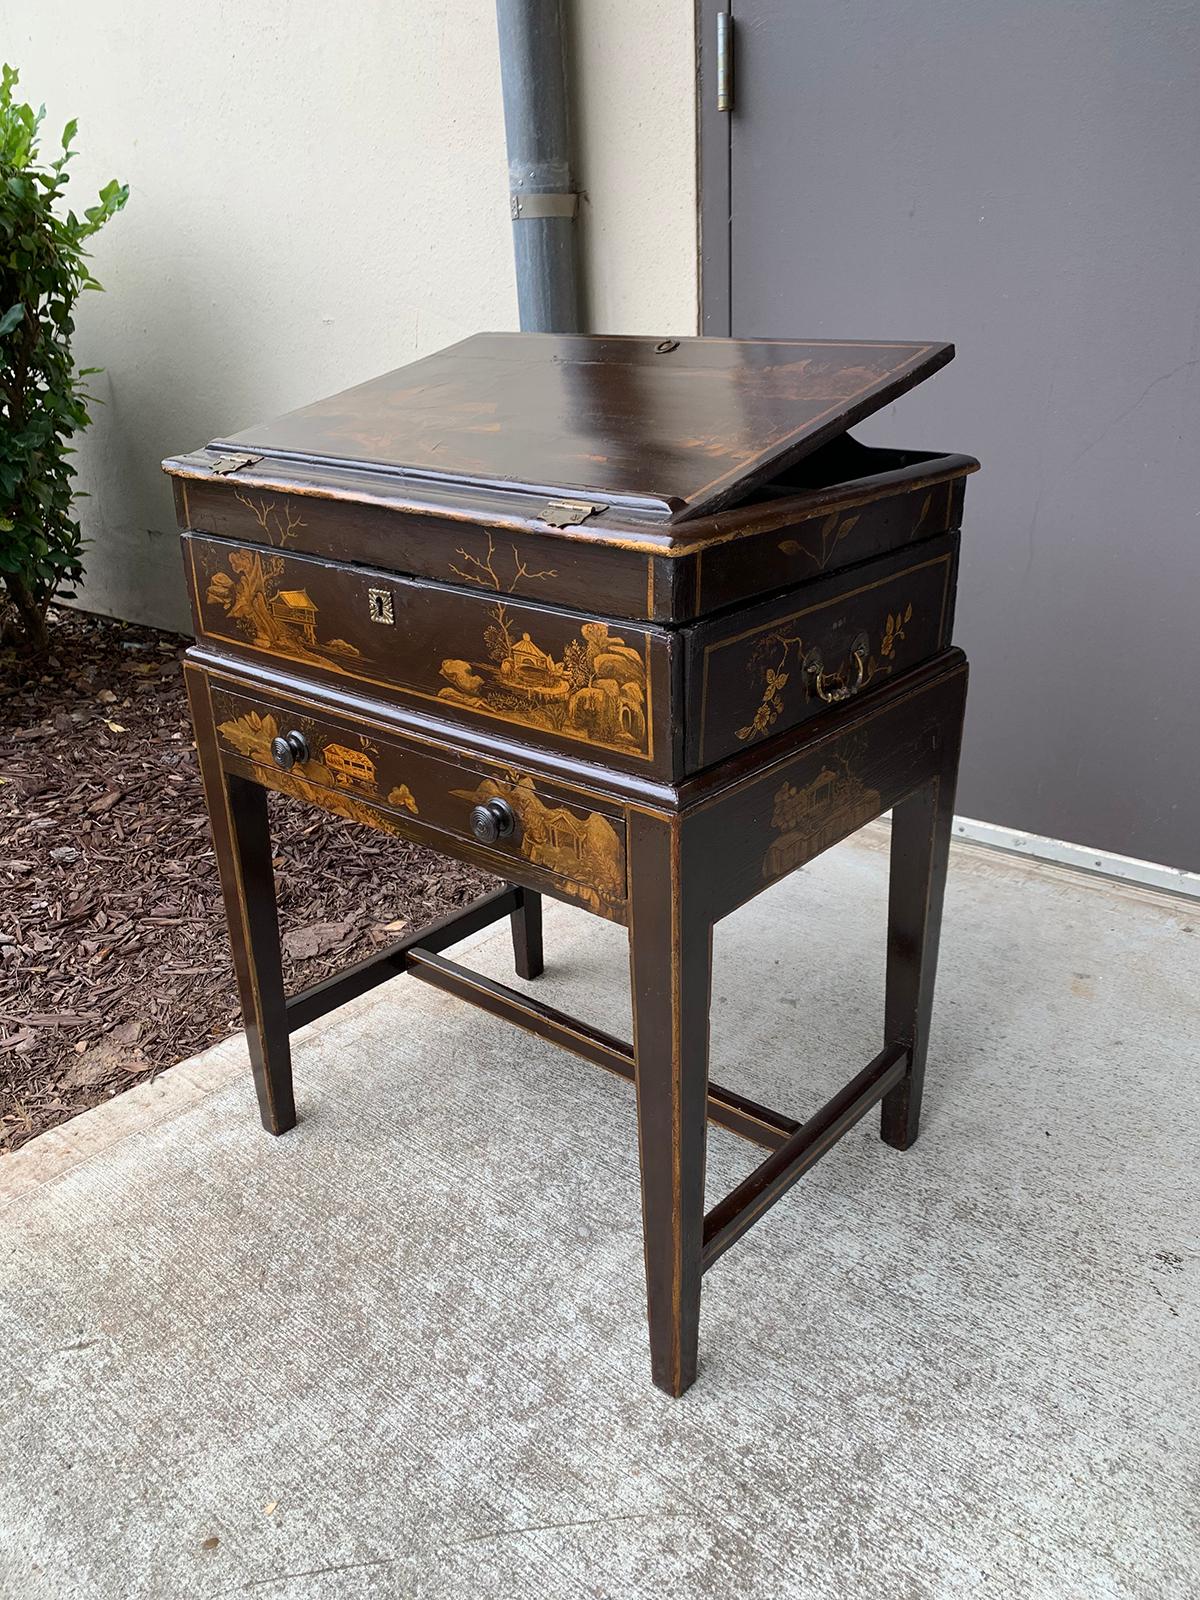 Chinoiserie lacquered writing box on stand with writing lift
Measures: 23